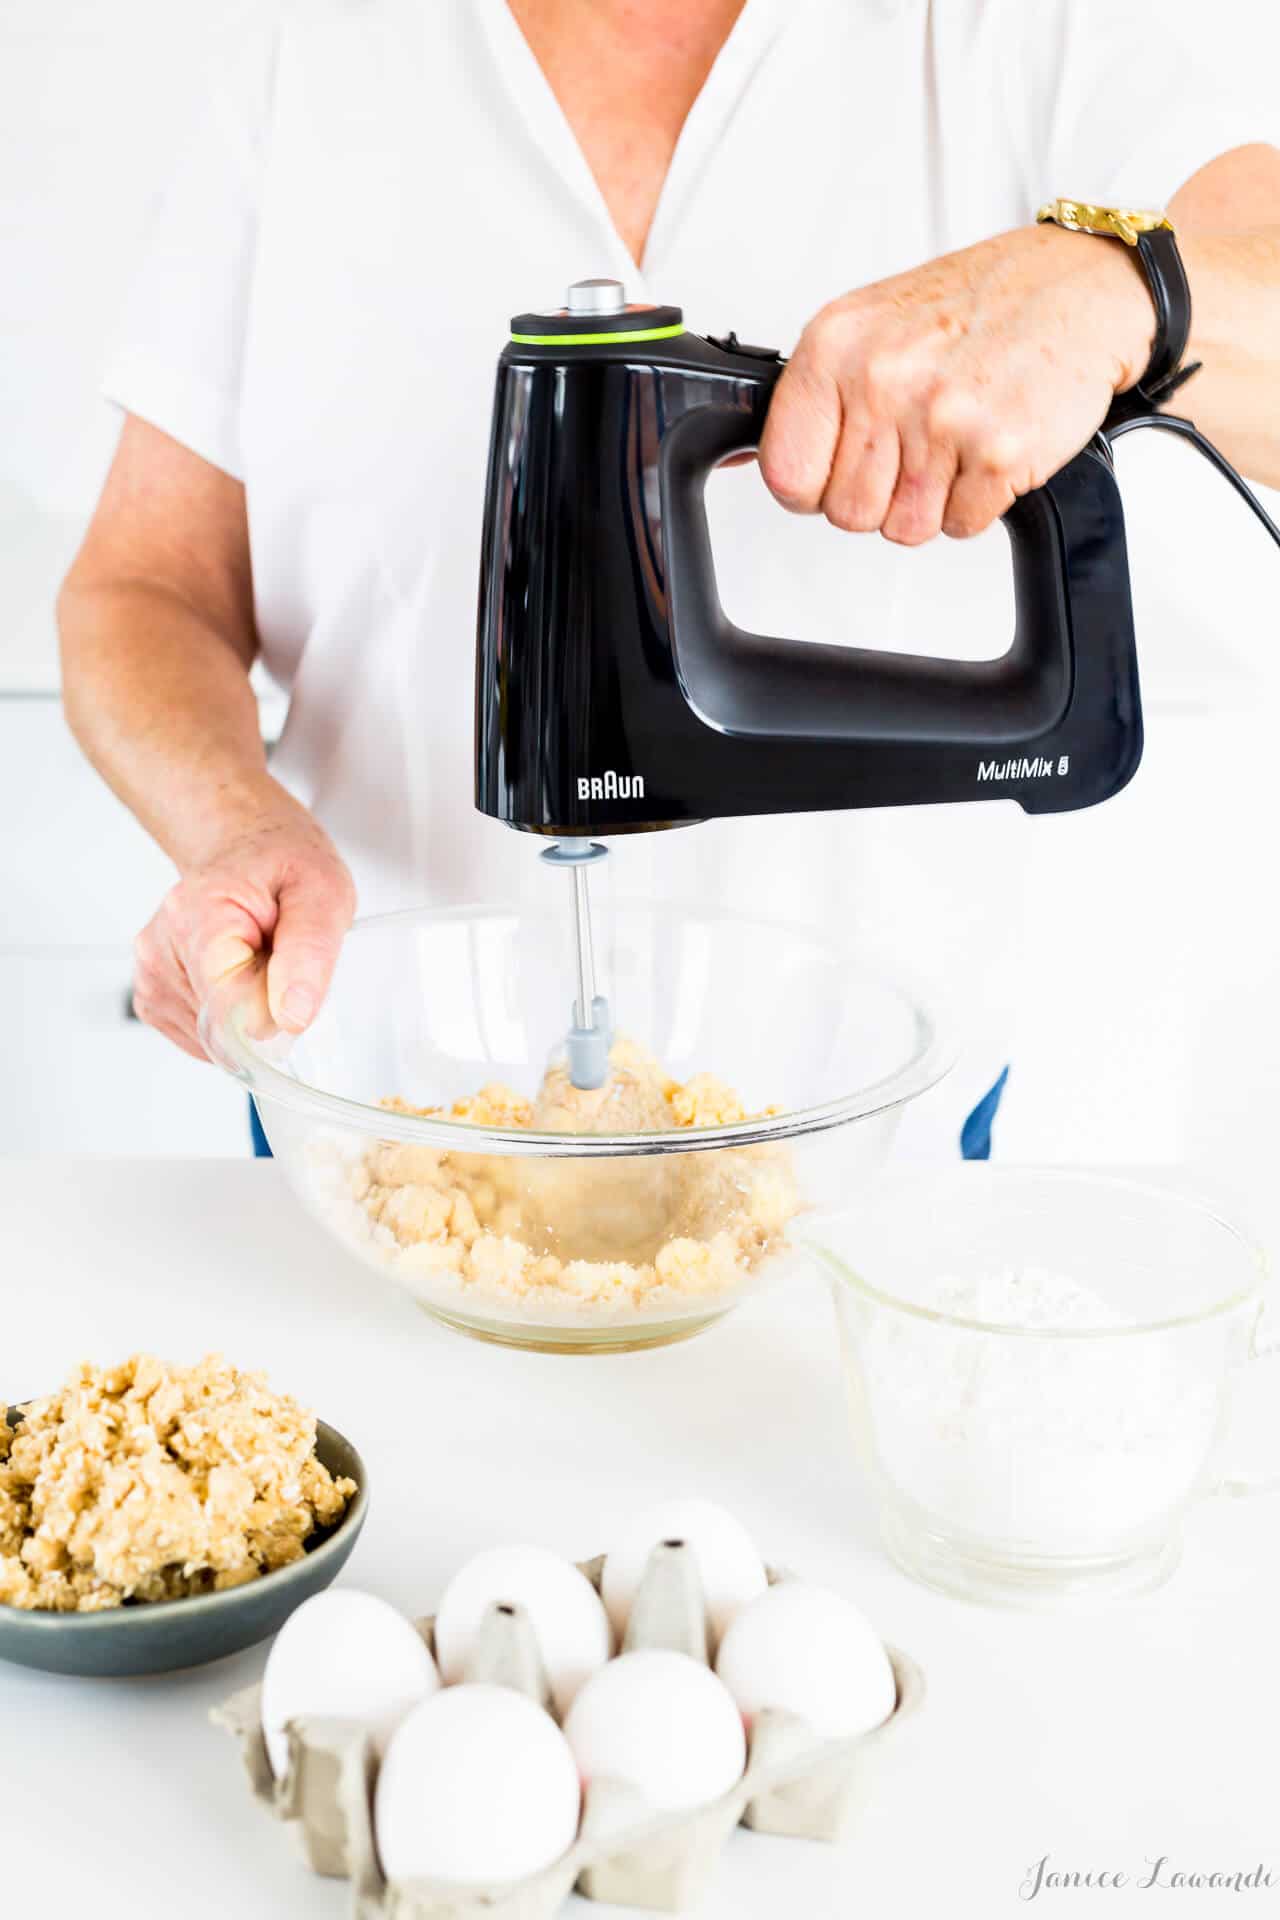 Creaming butter and sugar with a Braun hand held mixer